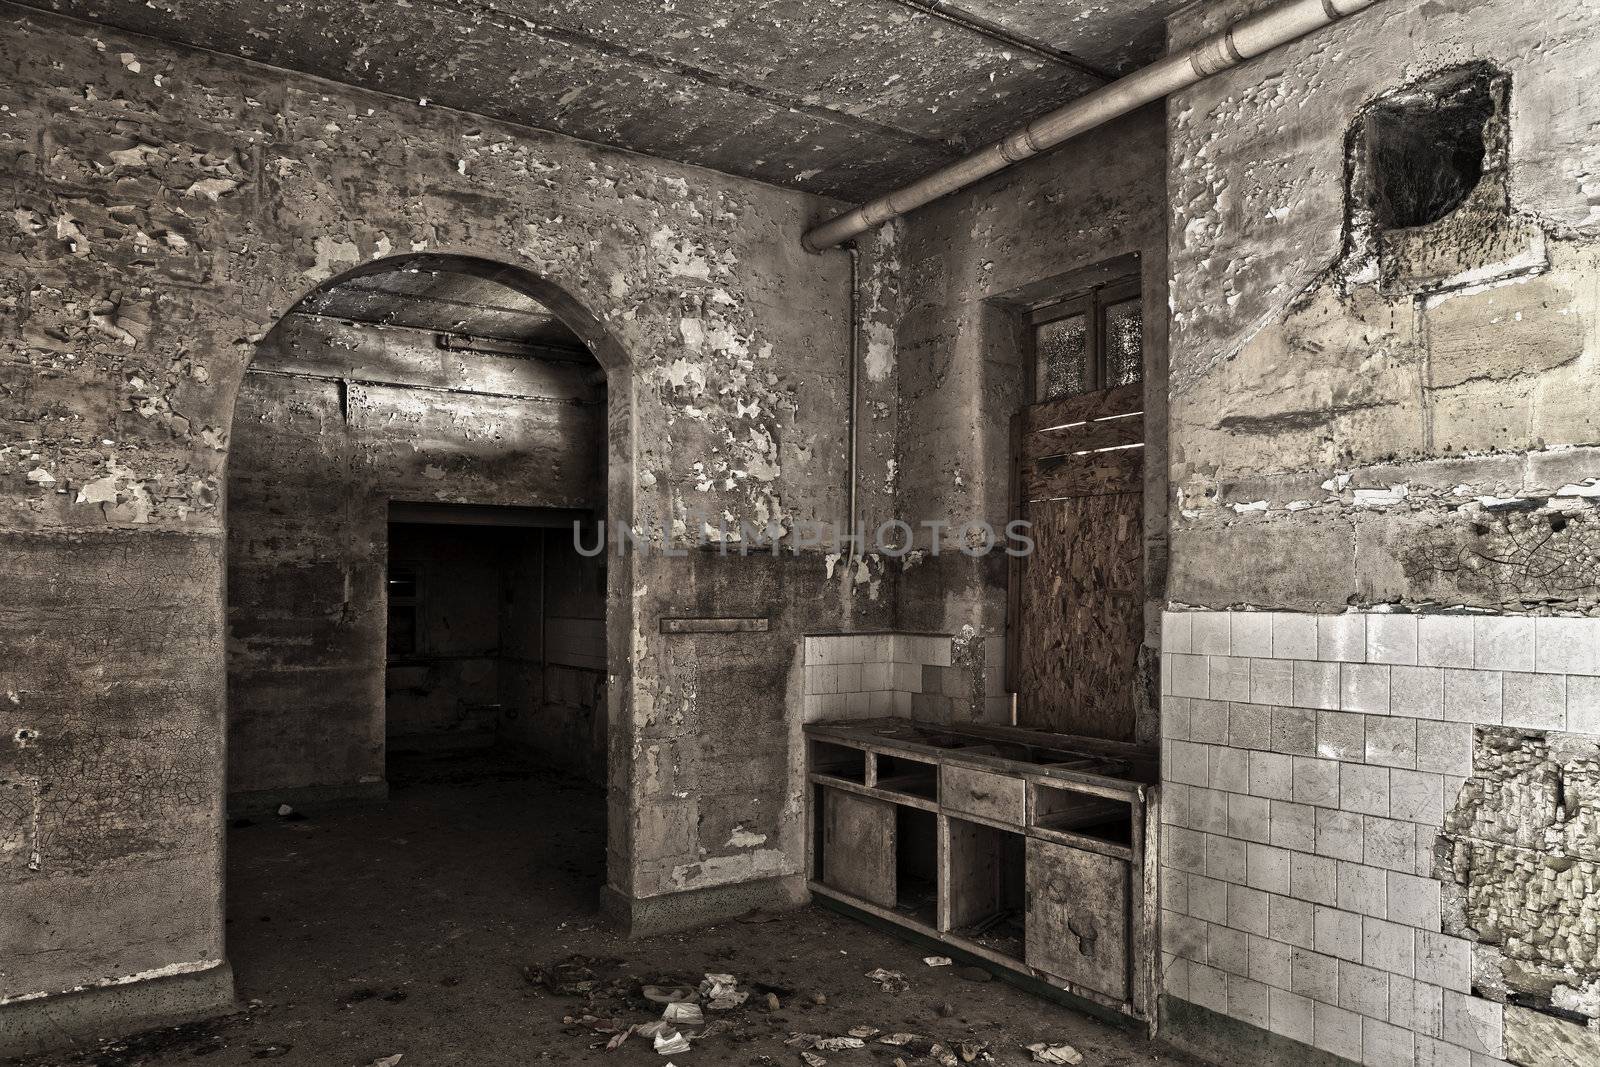 Interior shot of an old and decaying kitchen